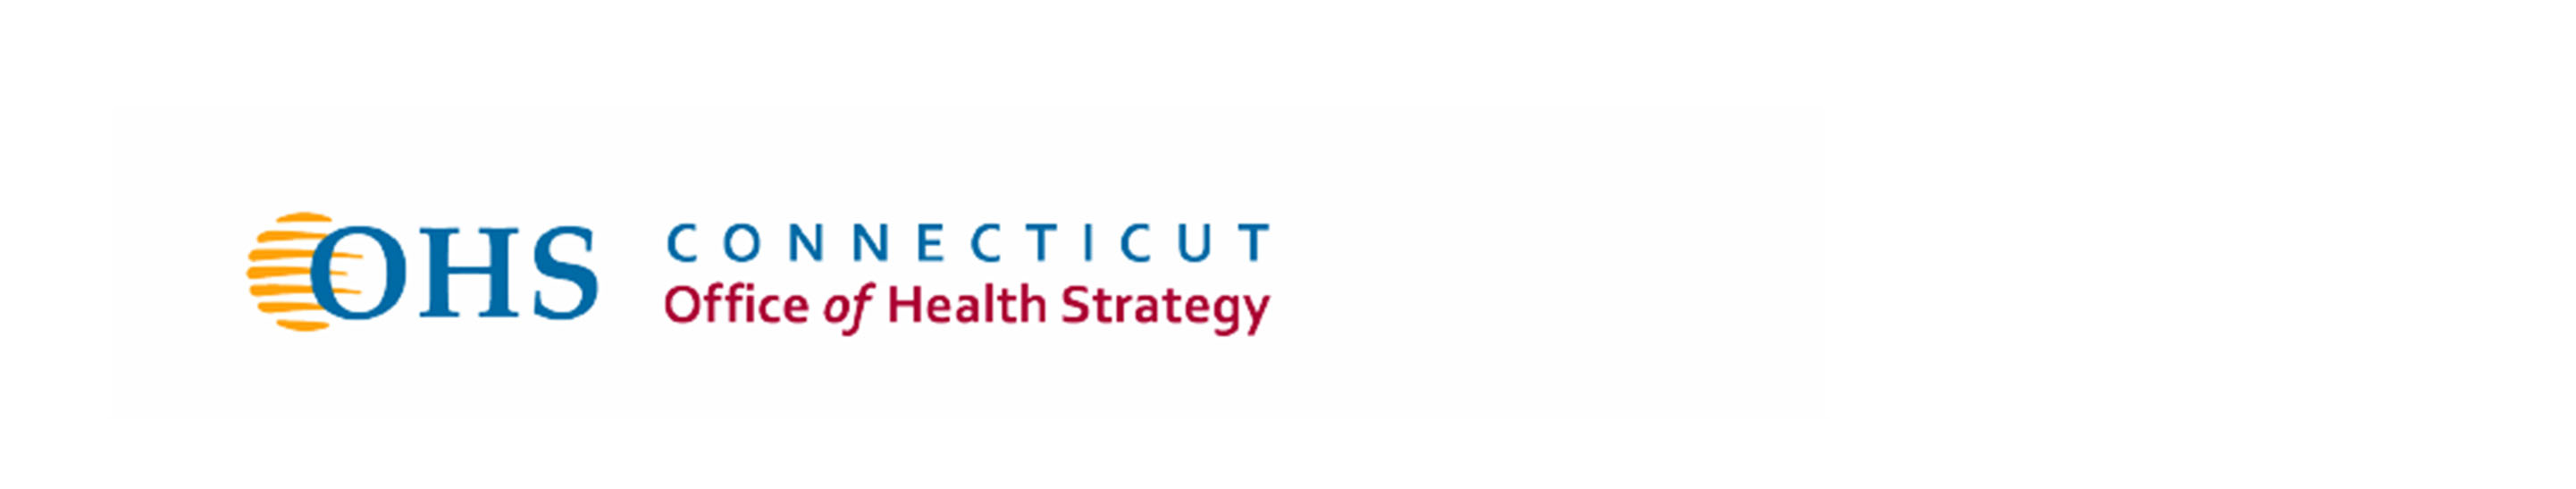 CT Office of Health Strategy logo